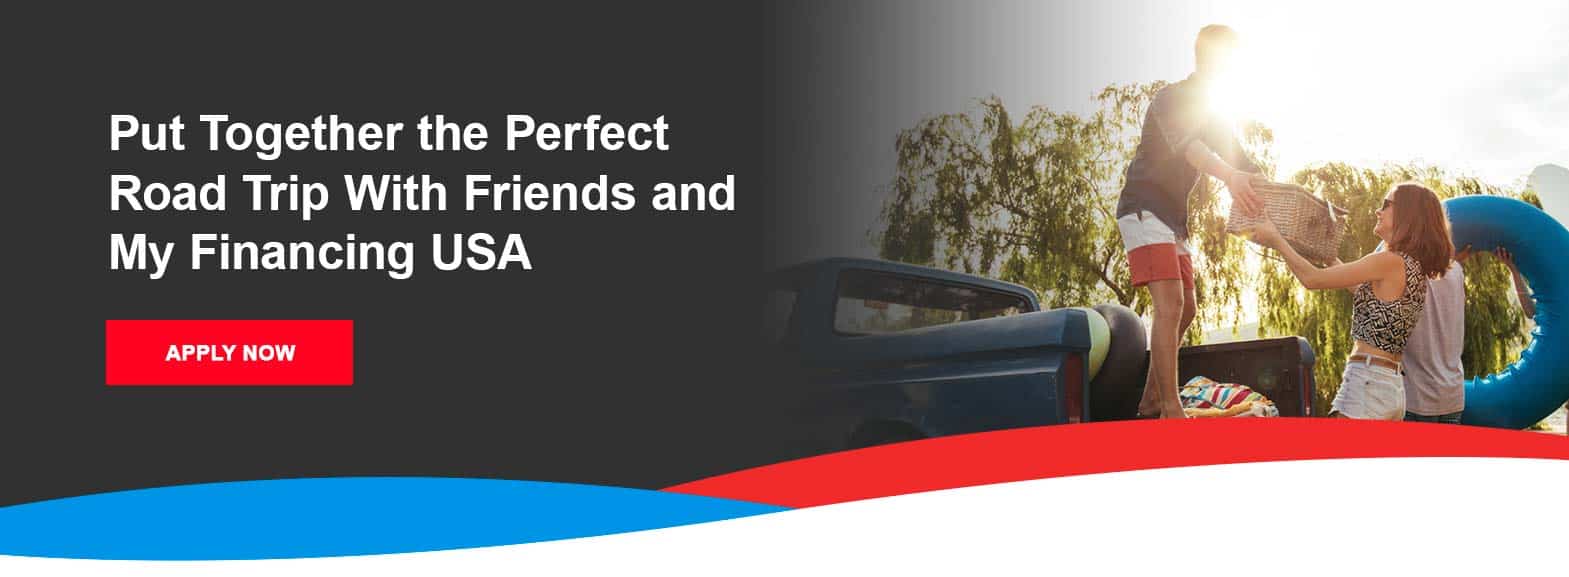 Put Together the Perfect Road Trip With Friends and My Financing USA. Apply now!